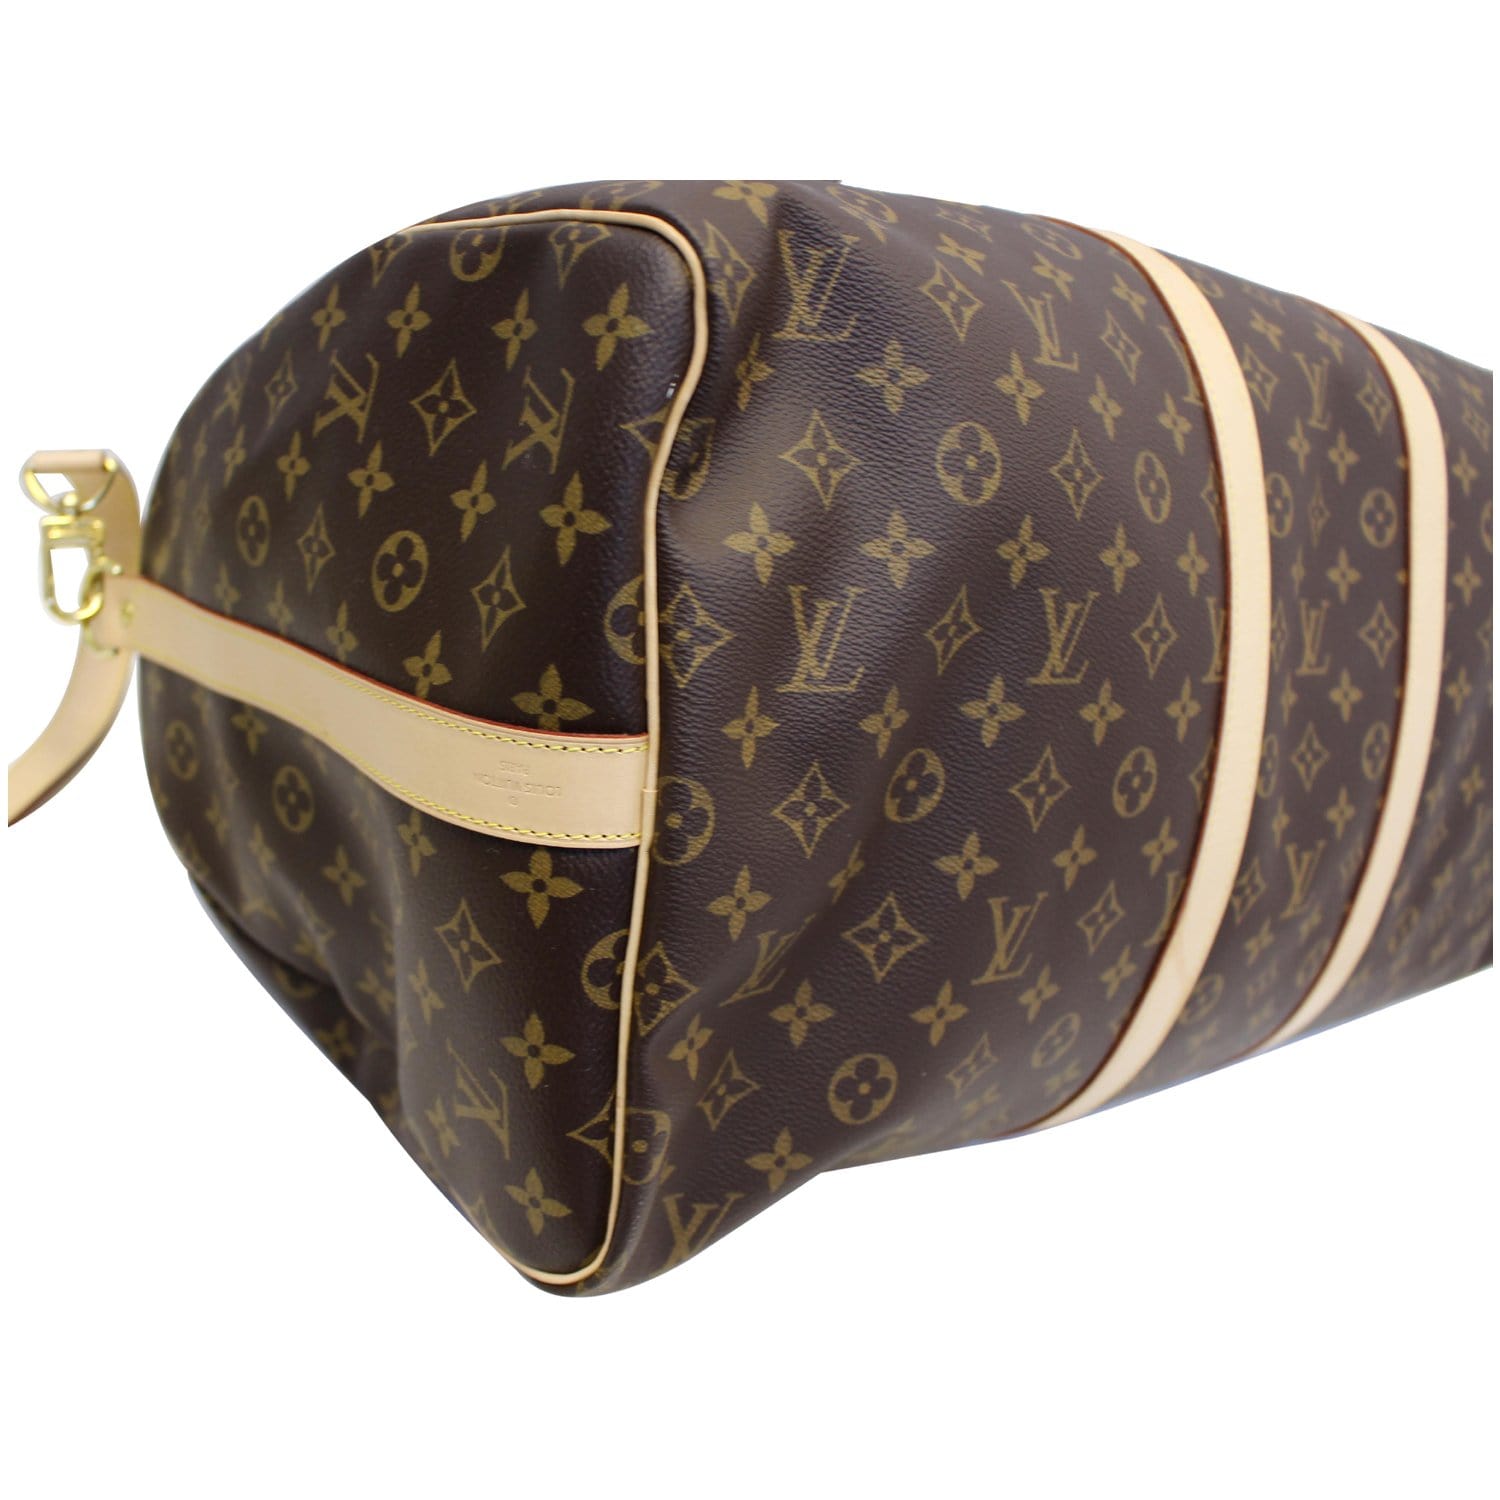 Fashion LuggageBags Women 3AA HandBags MICHAEL V0 KOR Shoulder  TravelBag Luxury Men ToteLOUISVUITTON KEEPALL 55 Cm From  Songwukong, $34.52